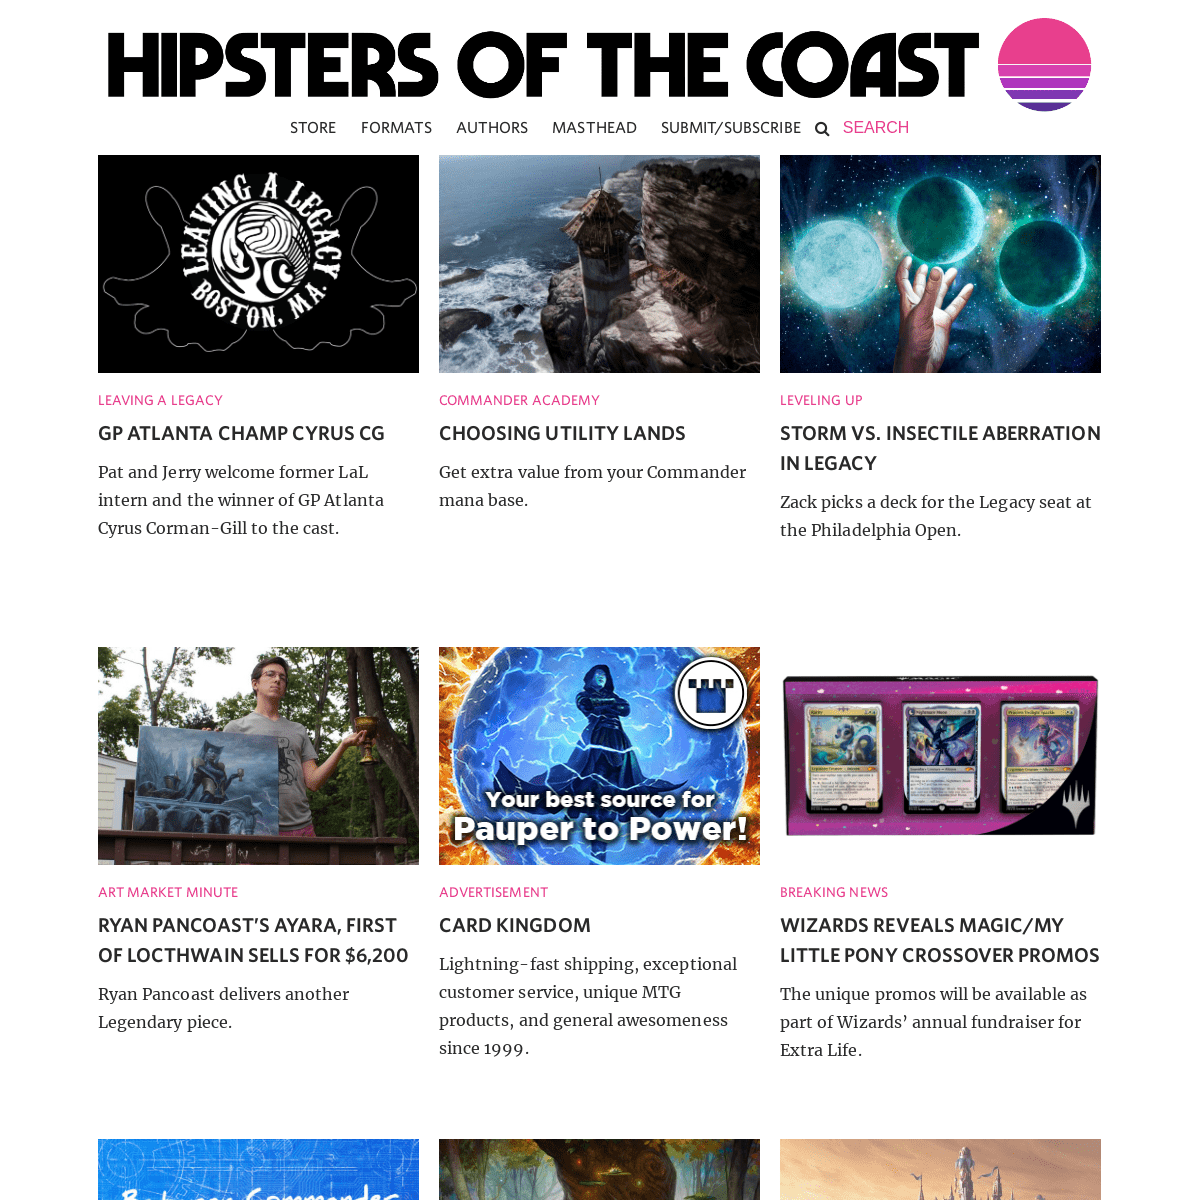 A complete backup of hipstersofthecoast.com